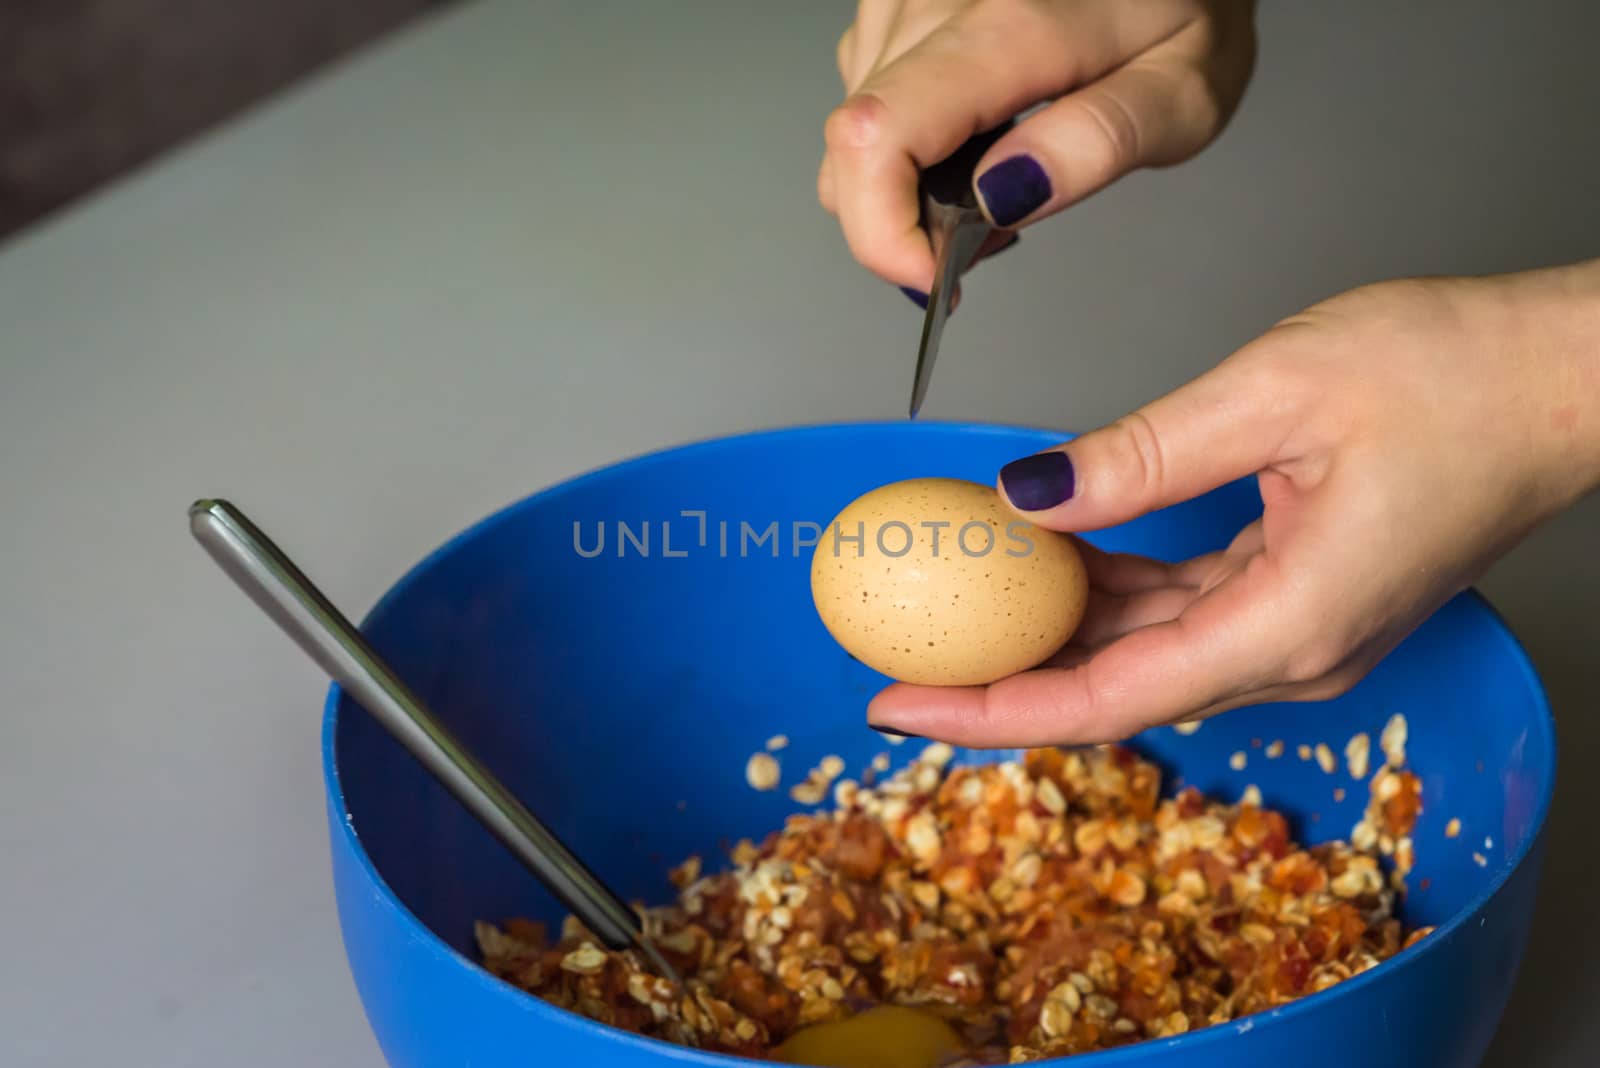 hand beats raw egg knife over a blue bowl